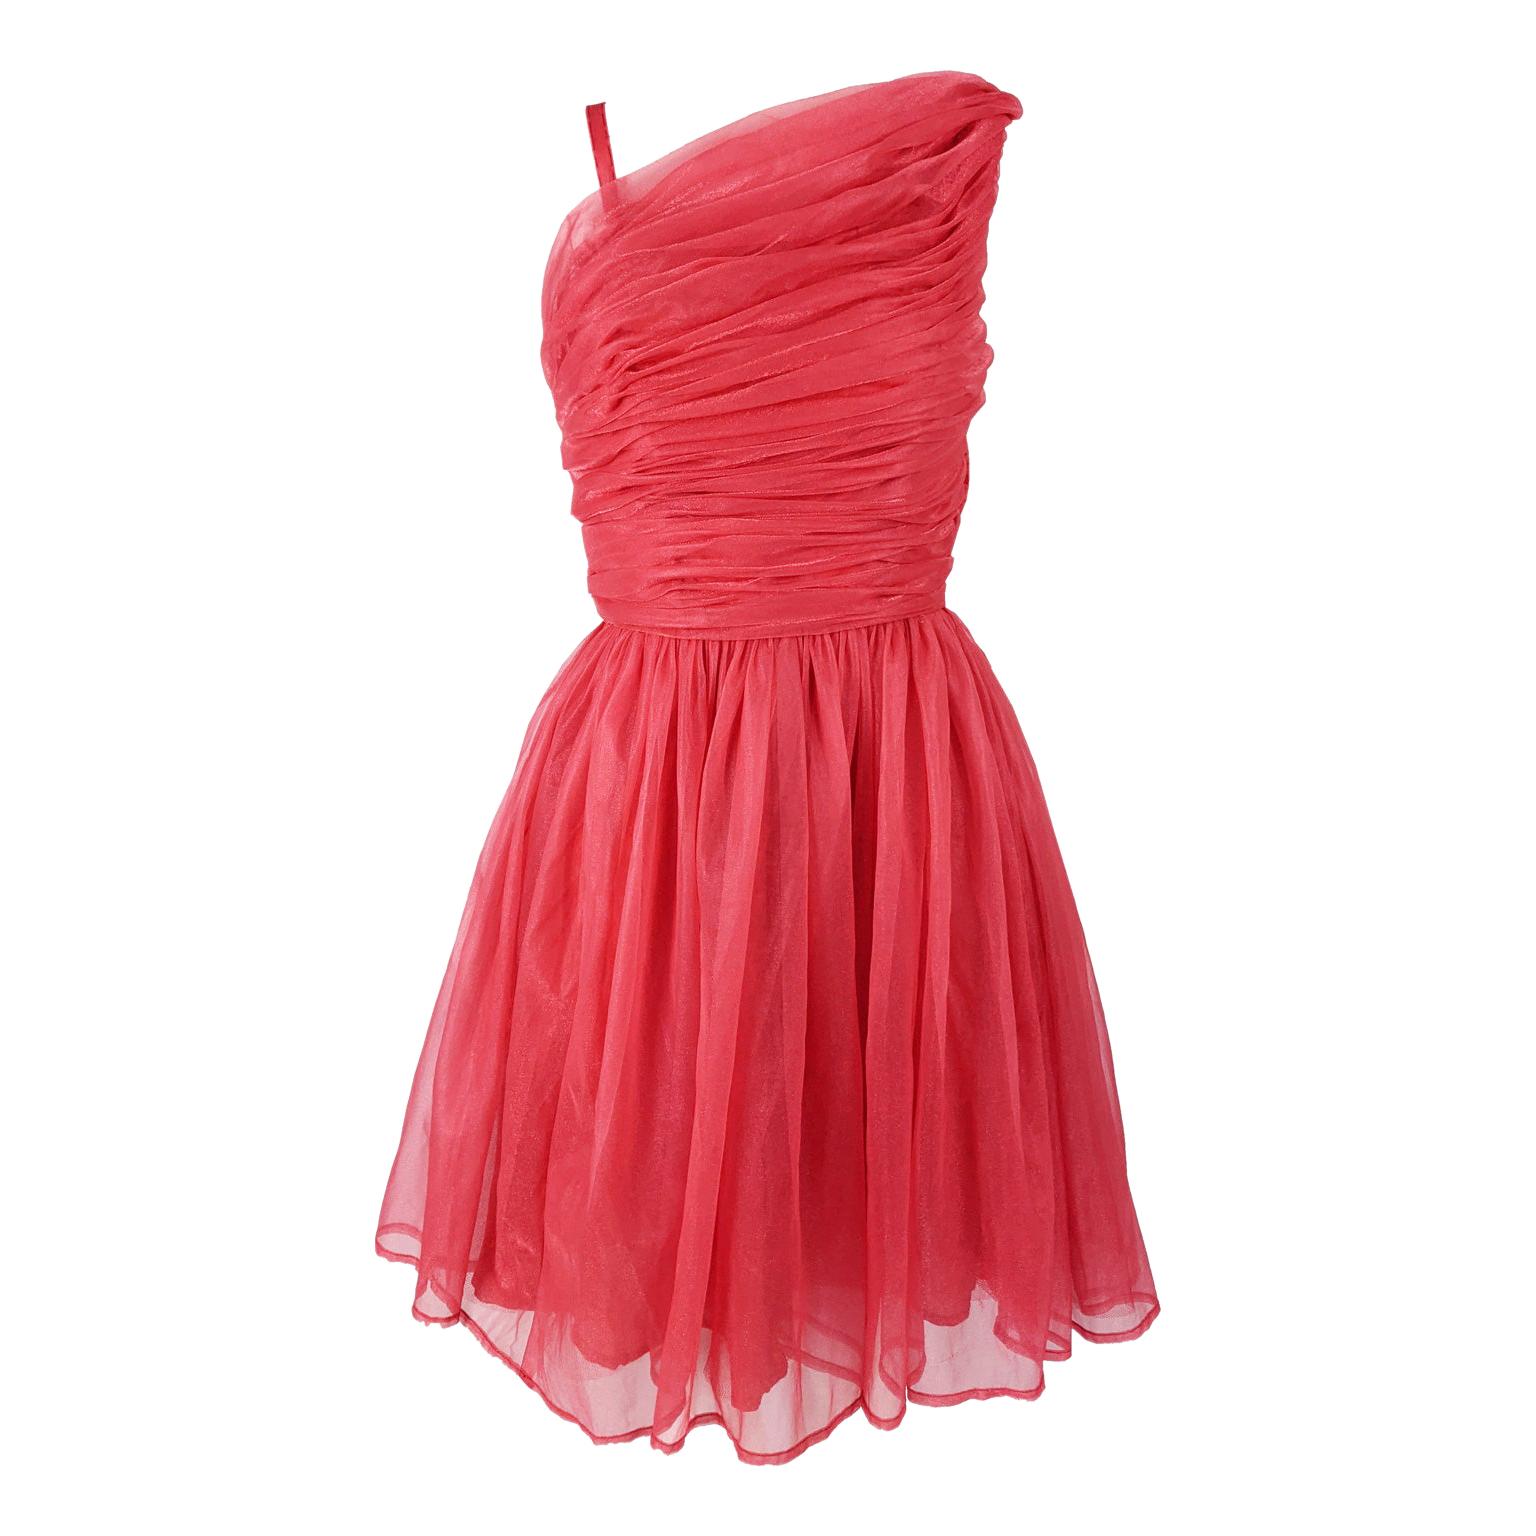 Norman Young London Vintage 1960s Coral Chiffon Party Dress For Sale